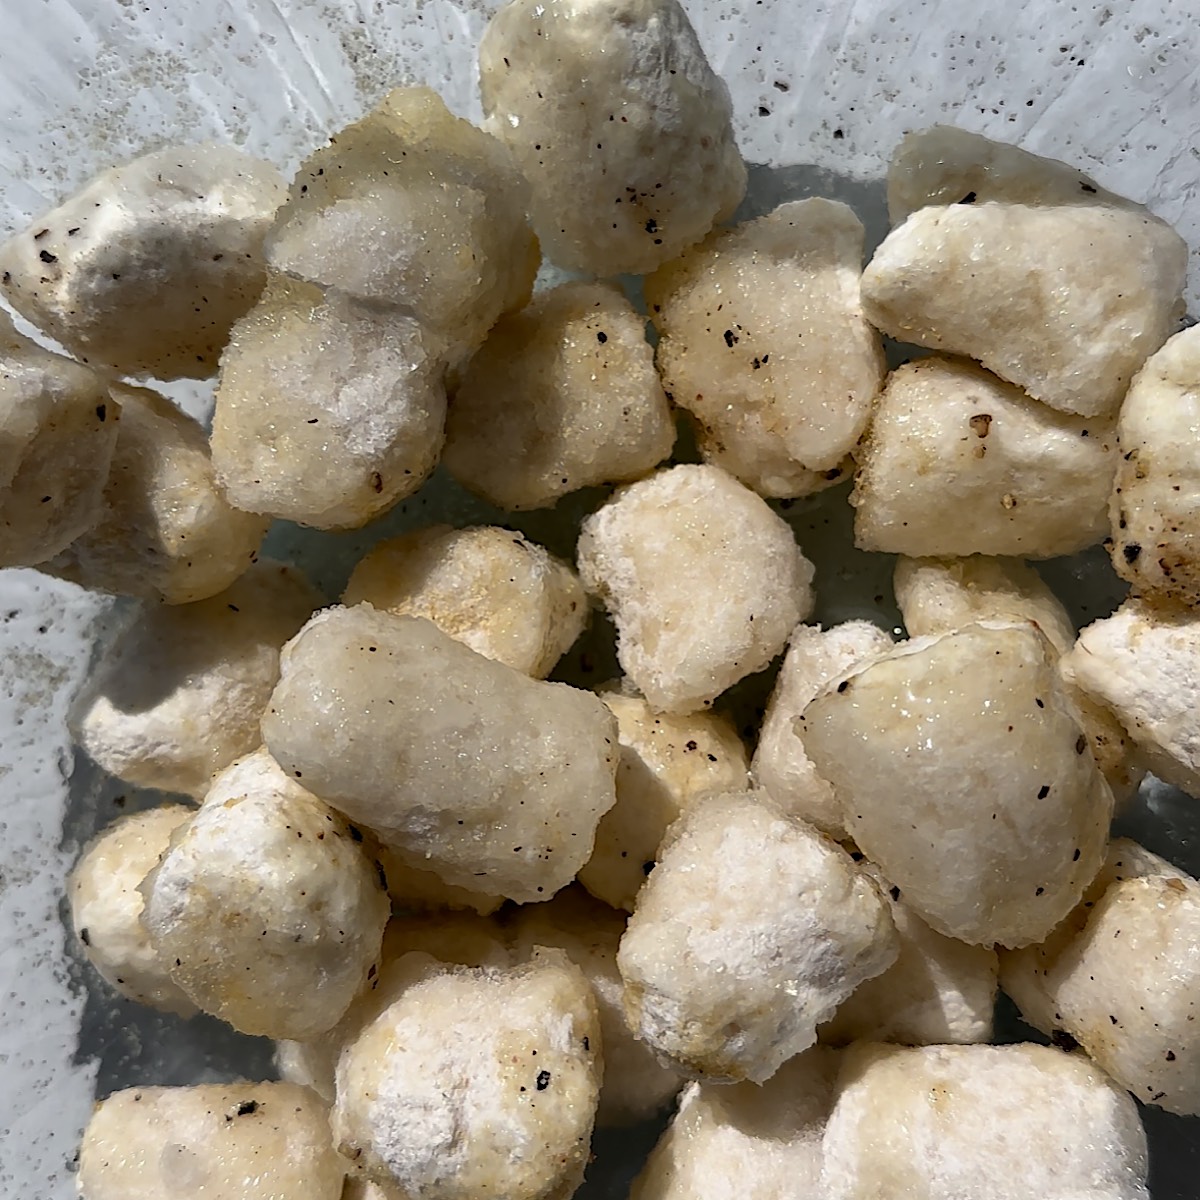 gnocchi in bowl with oil and spices